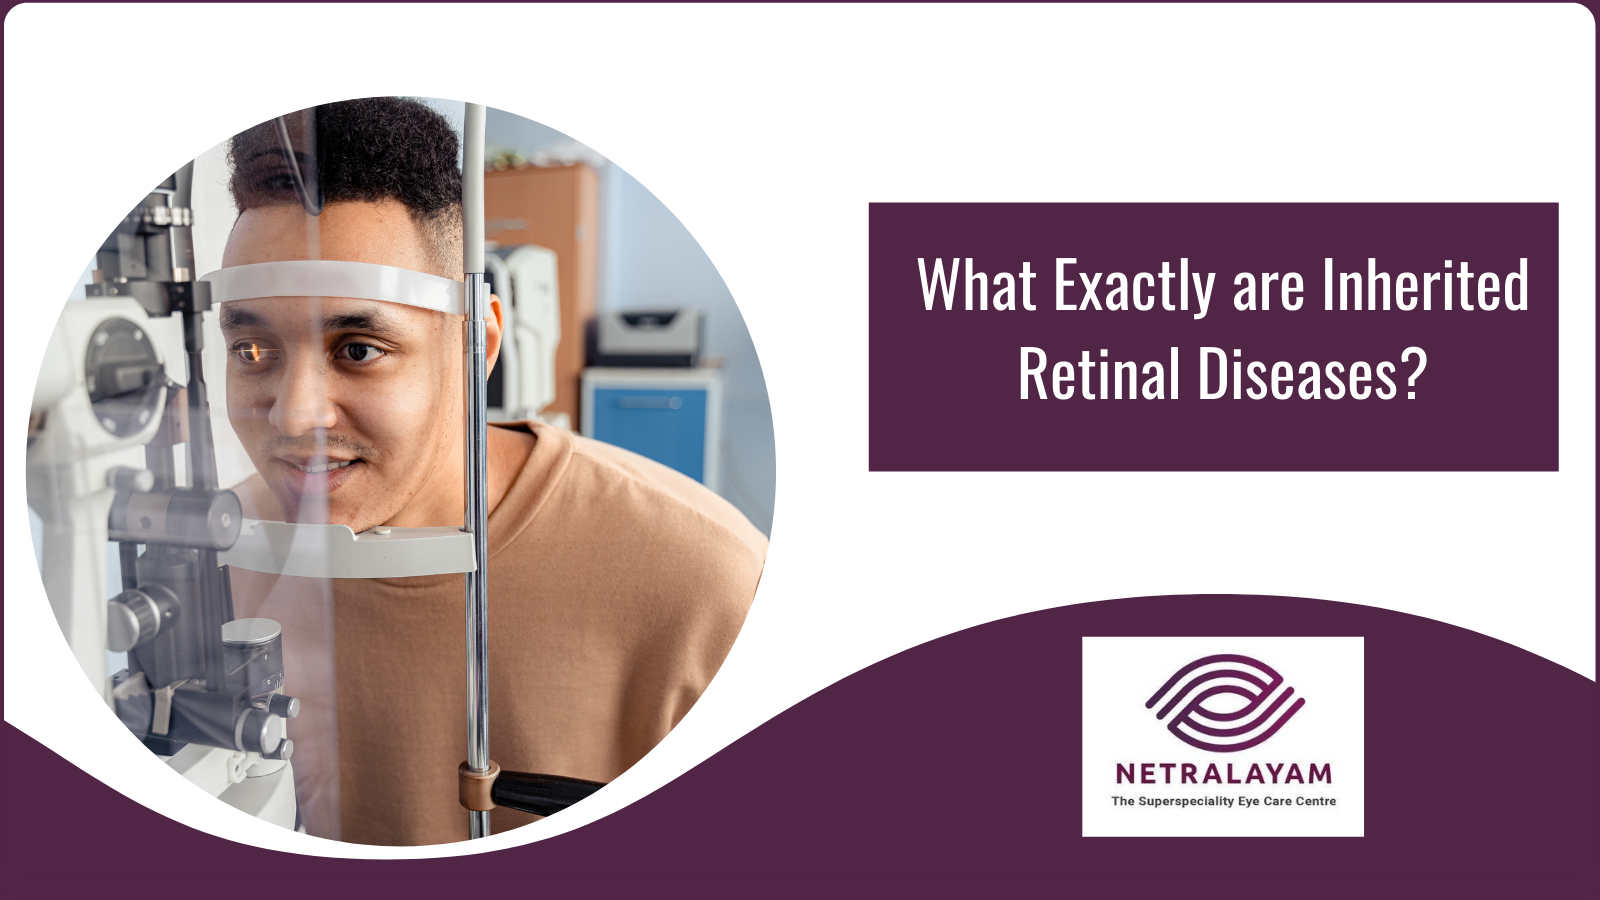 What Exactly are Inherited Retinal Diseases?